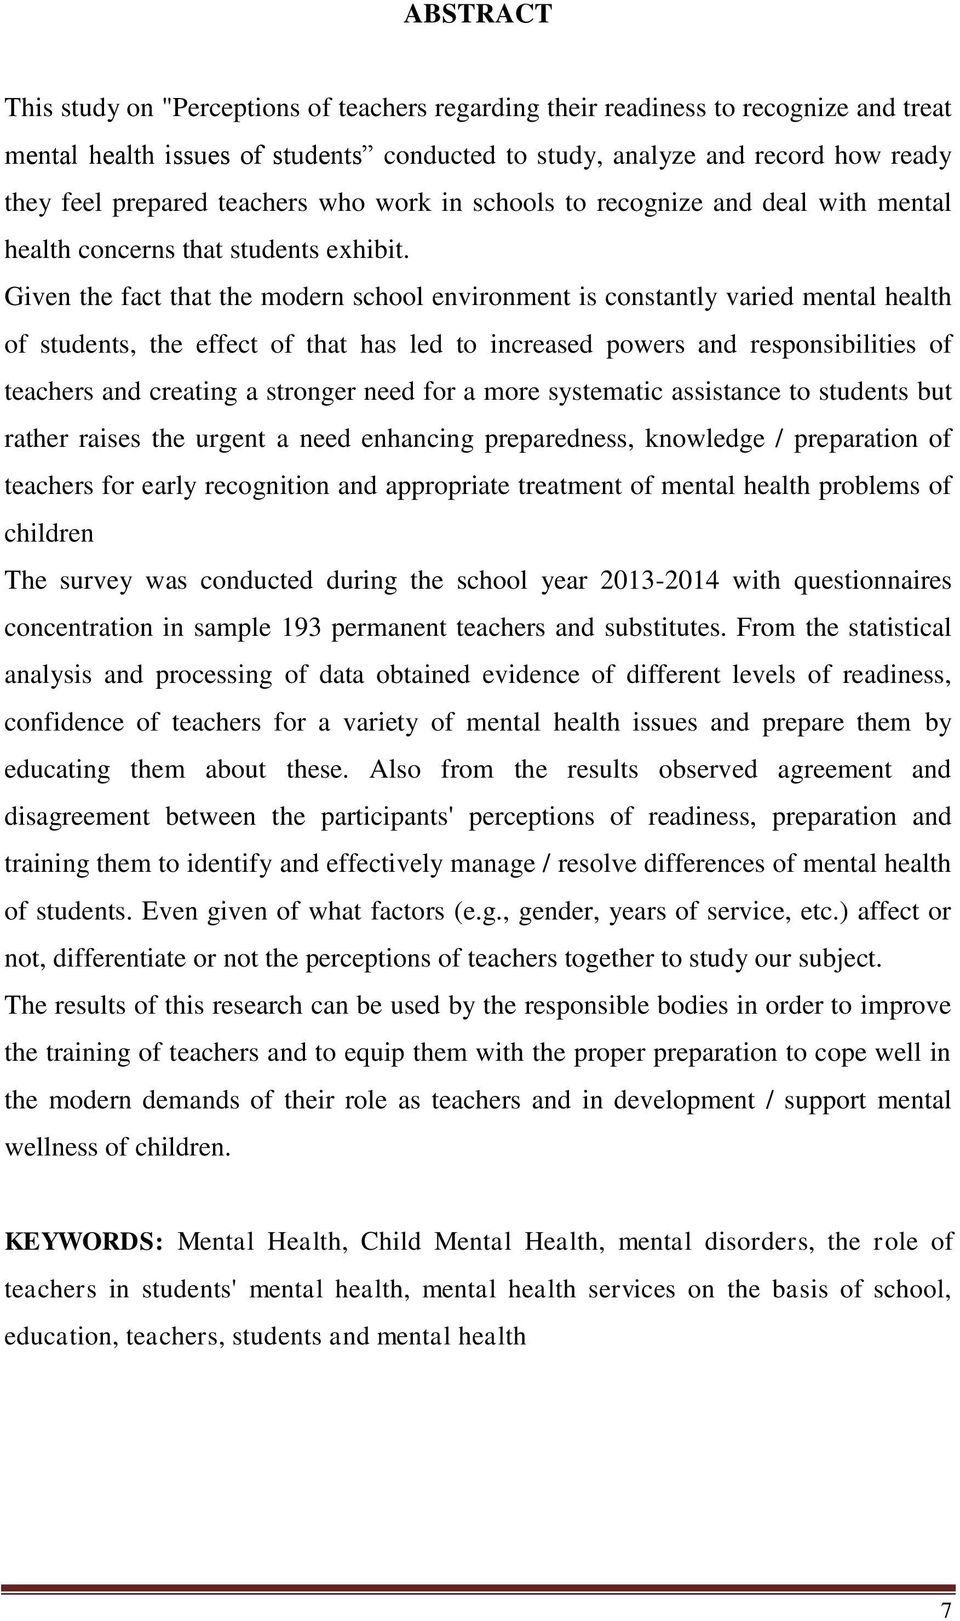 Given the fact that the modern school environment is constantly varied mental health of students, the effect of that has led to increased powers and responsibilities of teachers and creating a